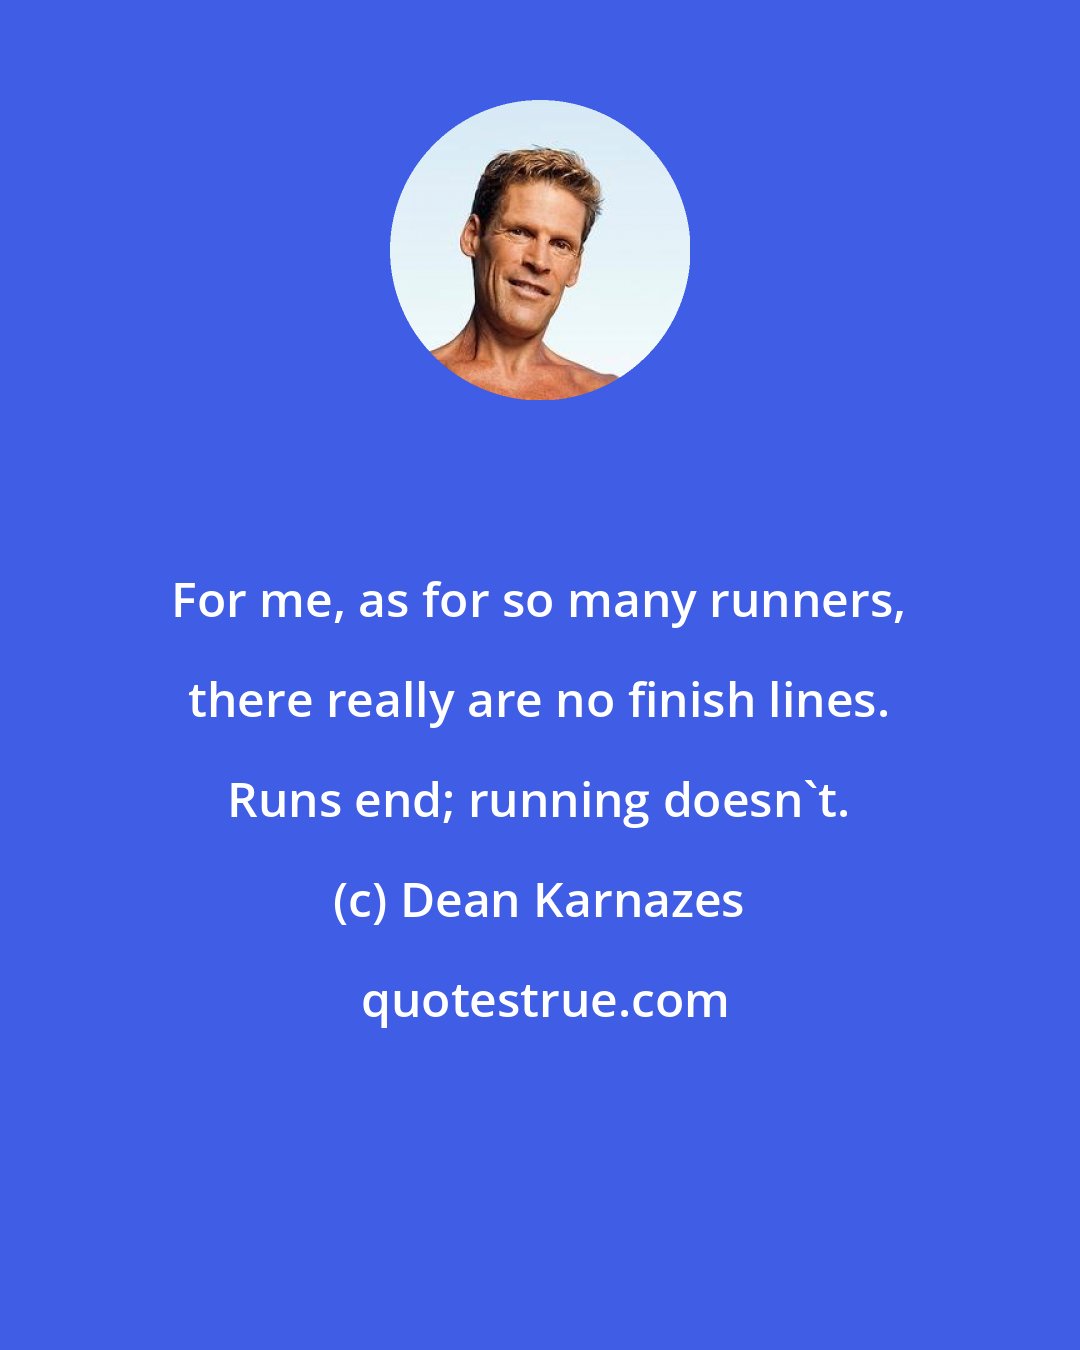 Dean Karnazes: For me, as for so many runners, there really are no finish lines. Runs end; running doesn't.